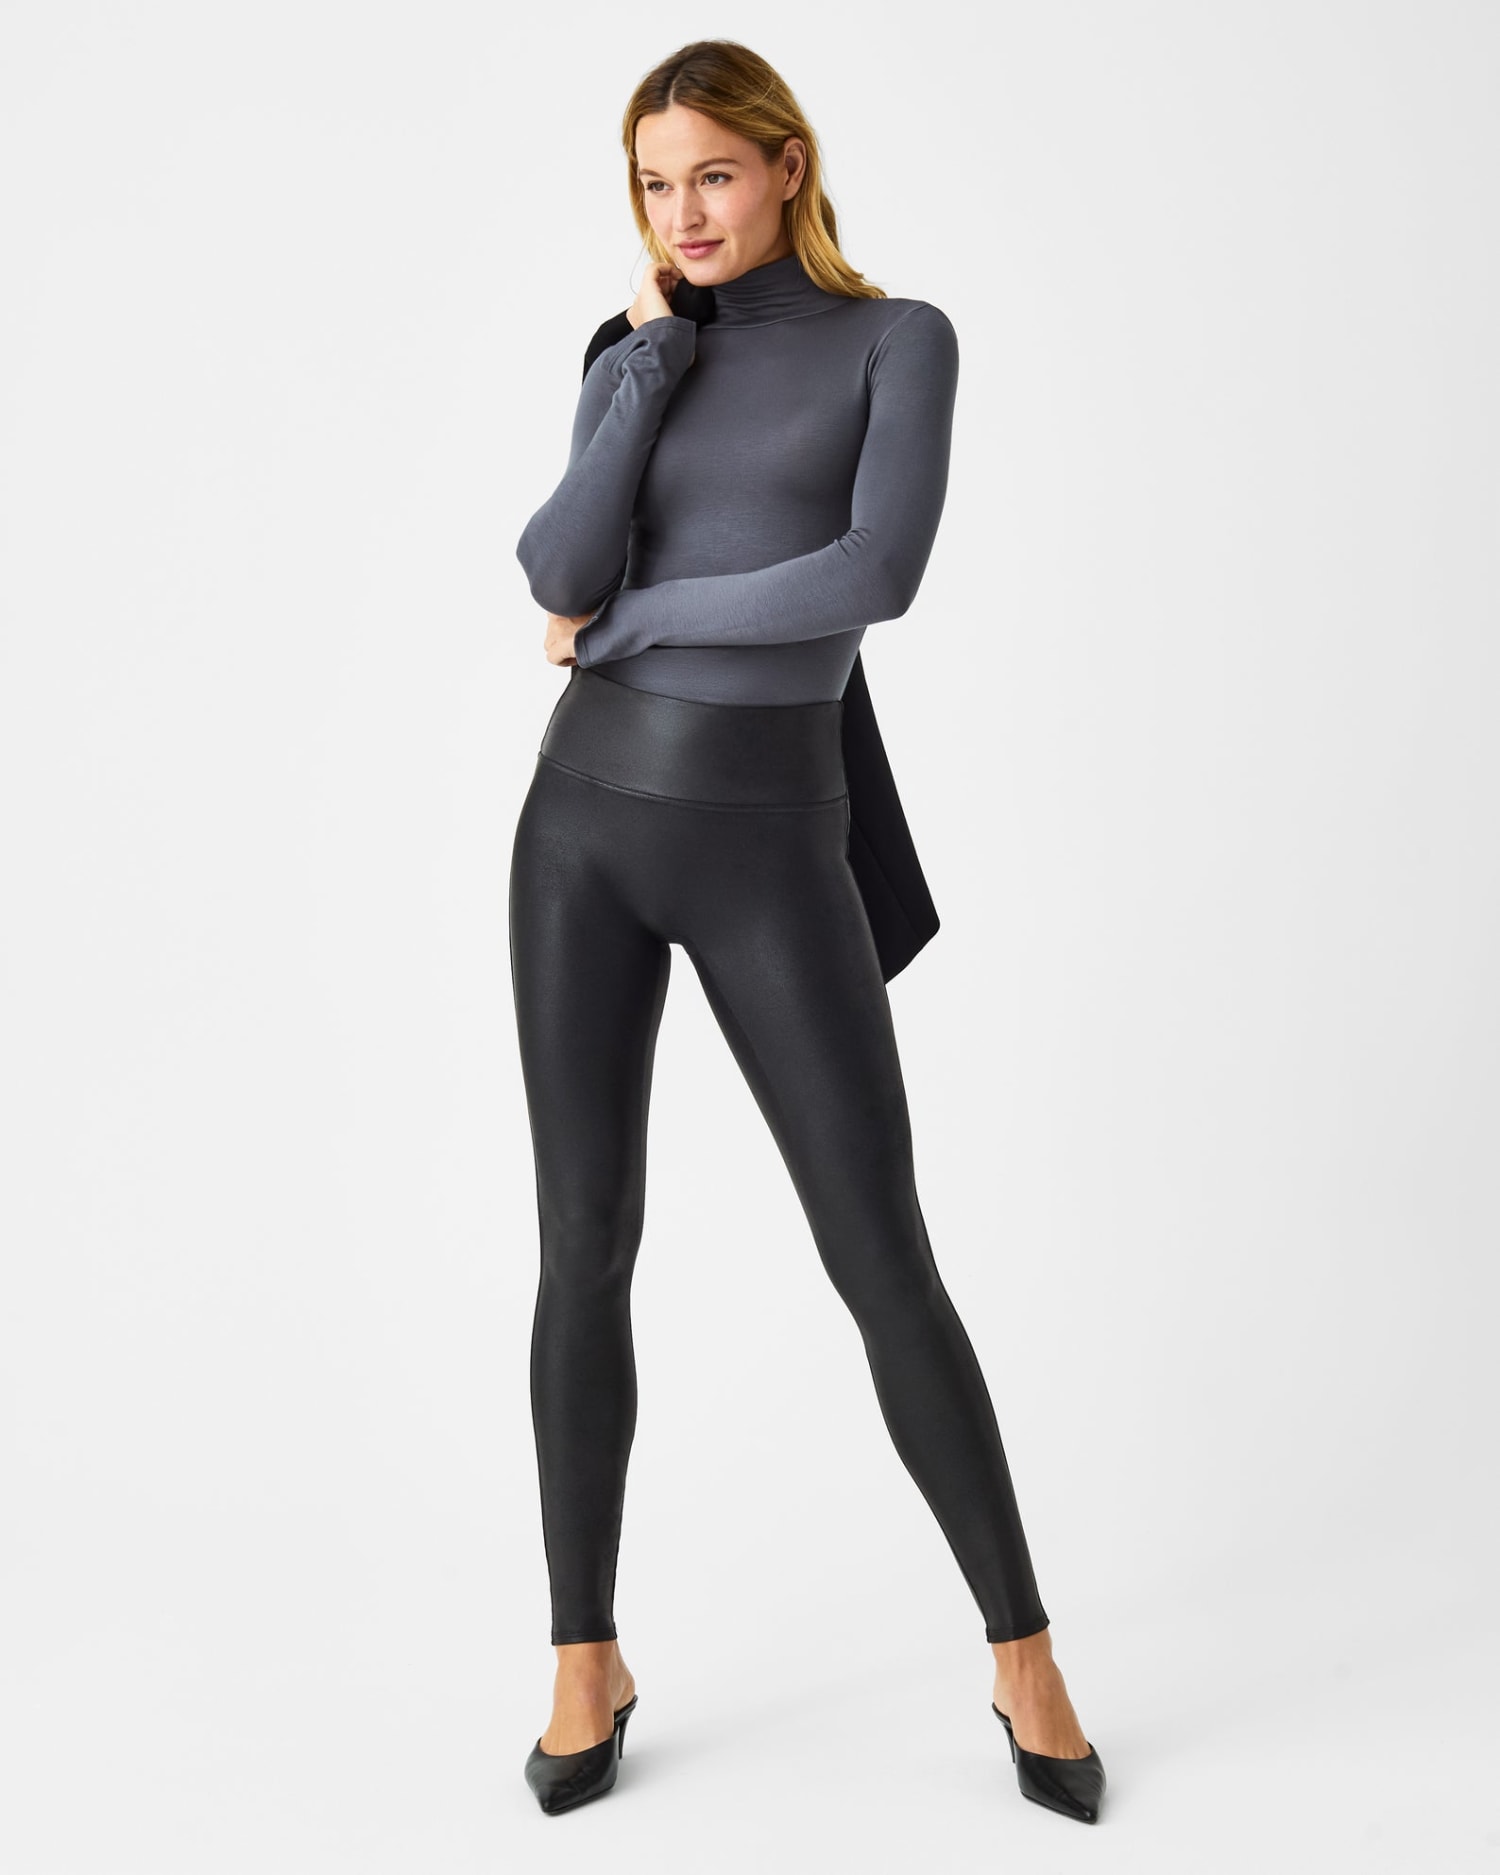 Spanx Black Friday Deal 2023: Save 20% on the Best-Selling Faux